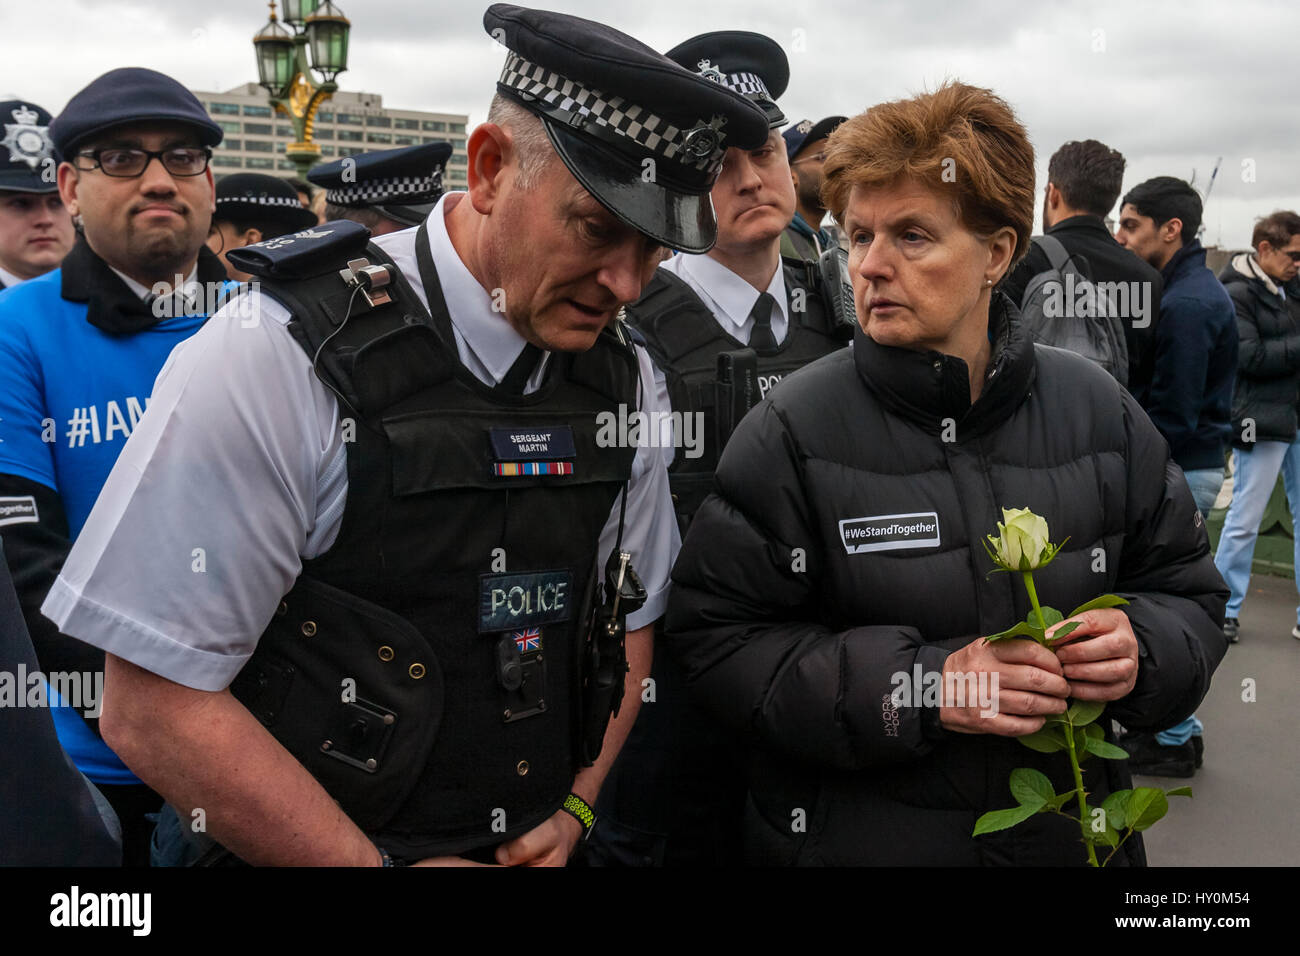 A Week After The London Terror Attack The Met Police Force and Members Of The Public Pay Their Respects To The Victims, Westminster Bridge, London, UK Stock Photo